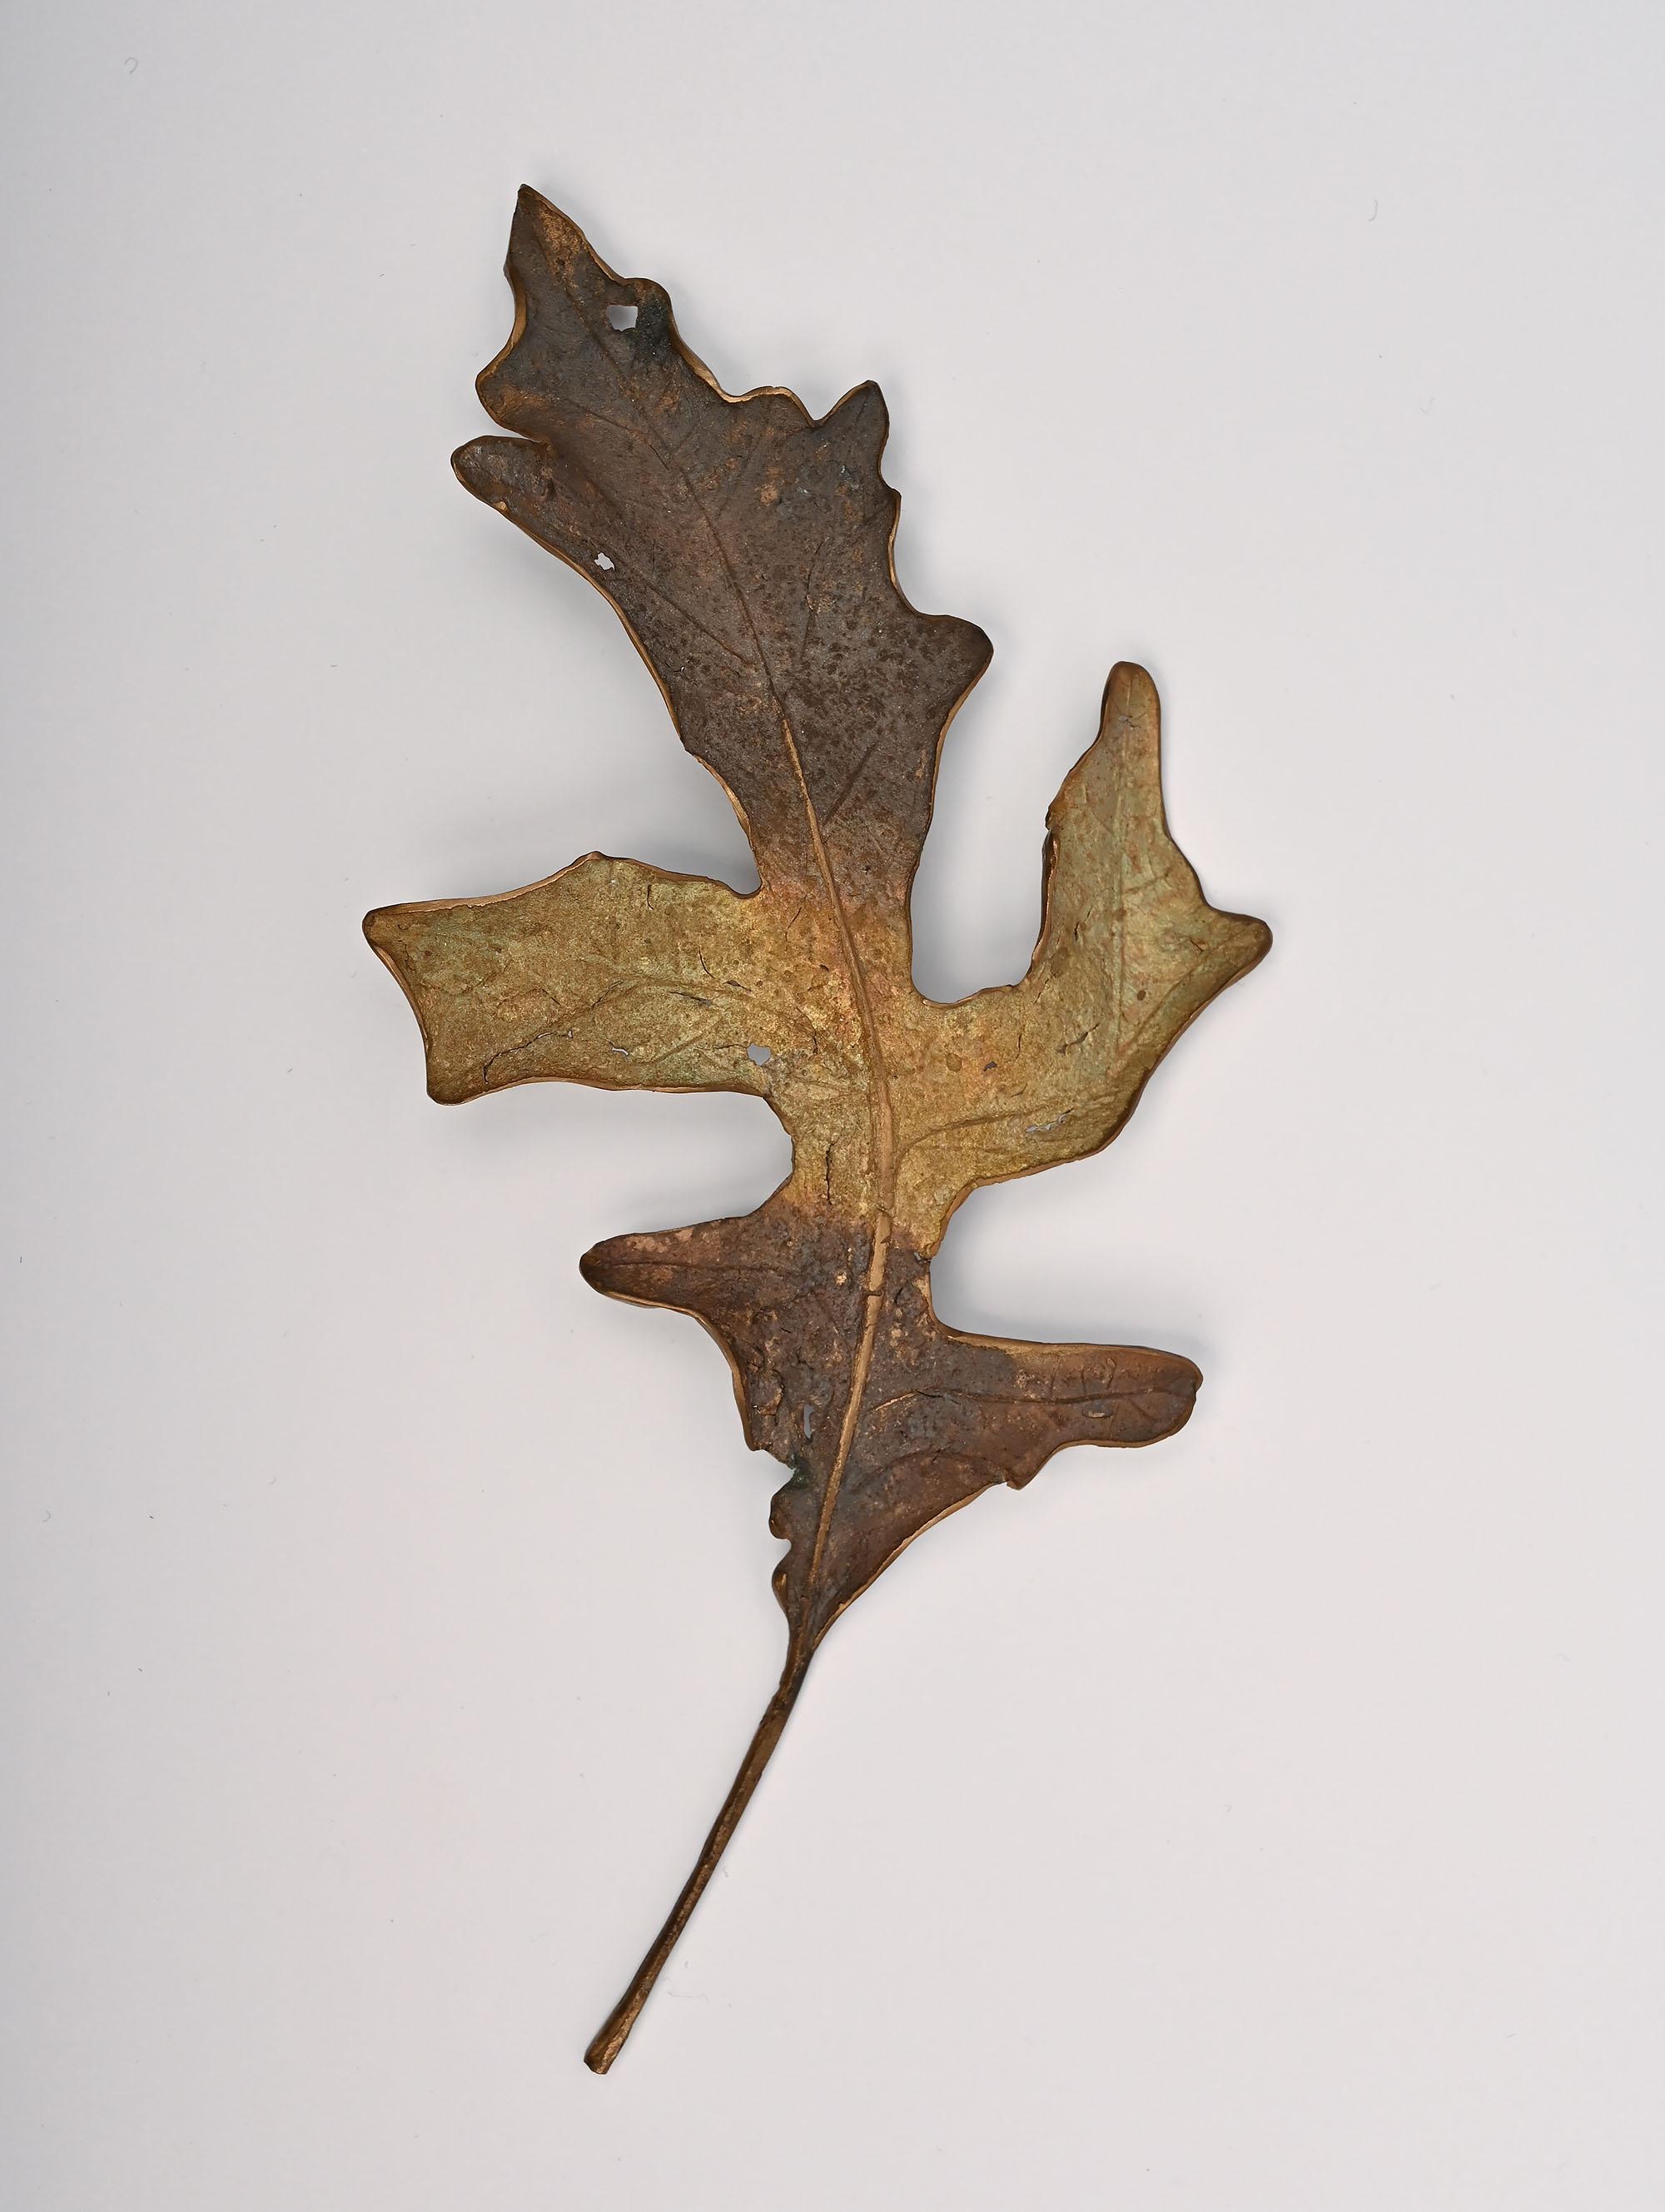 John Iversden is well known for his handmade jewelry inspired by forms in nature. In the 1990's and early 2000's, he did a serious of leaf brooches, usually made of patinated bronze. Several were purchased by First Lady Laura Bush for gifts to